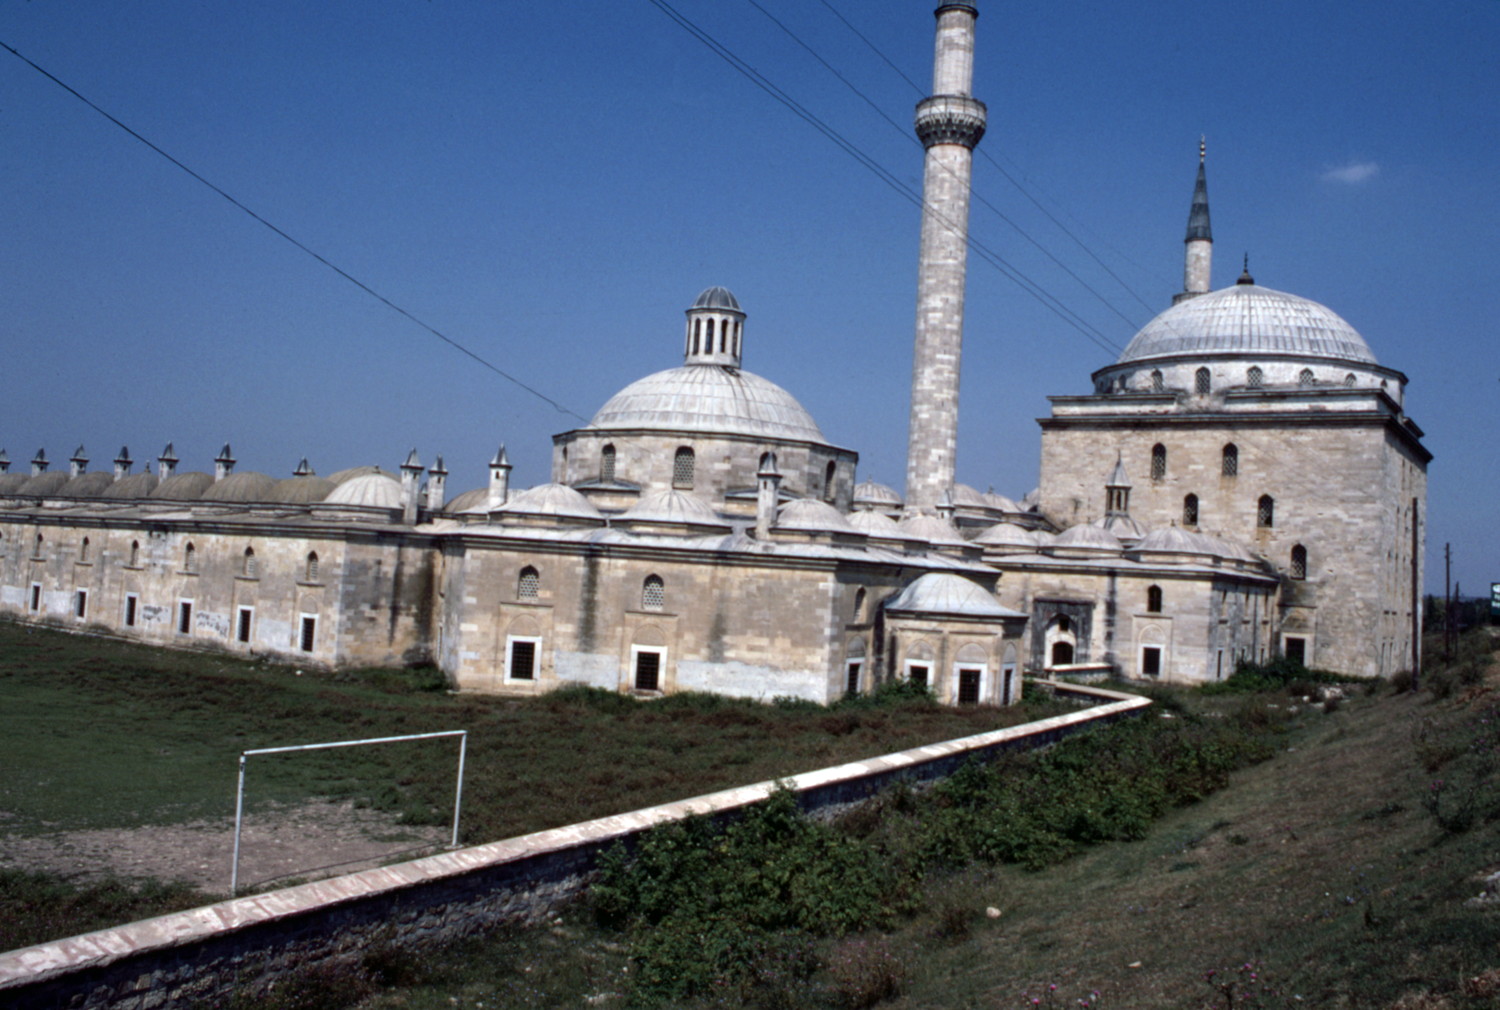 General view of complex, showing madrasa, hospital, hospice, and baths